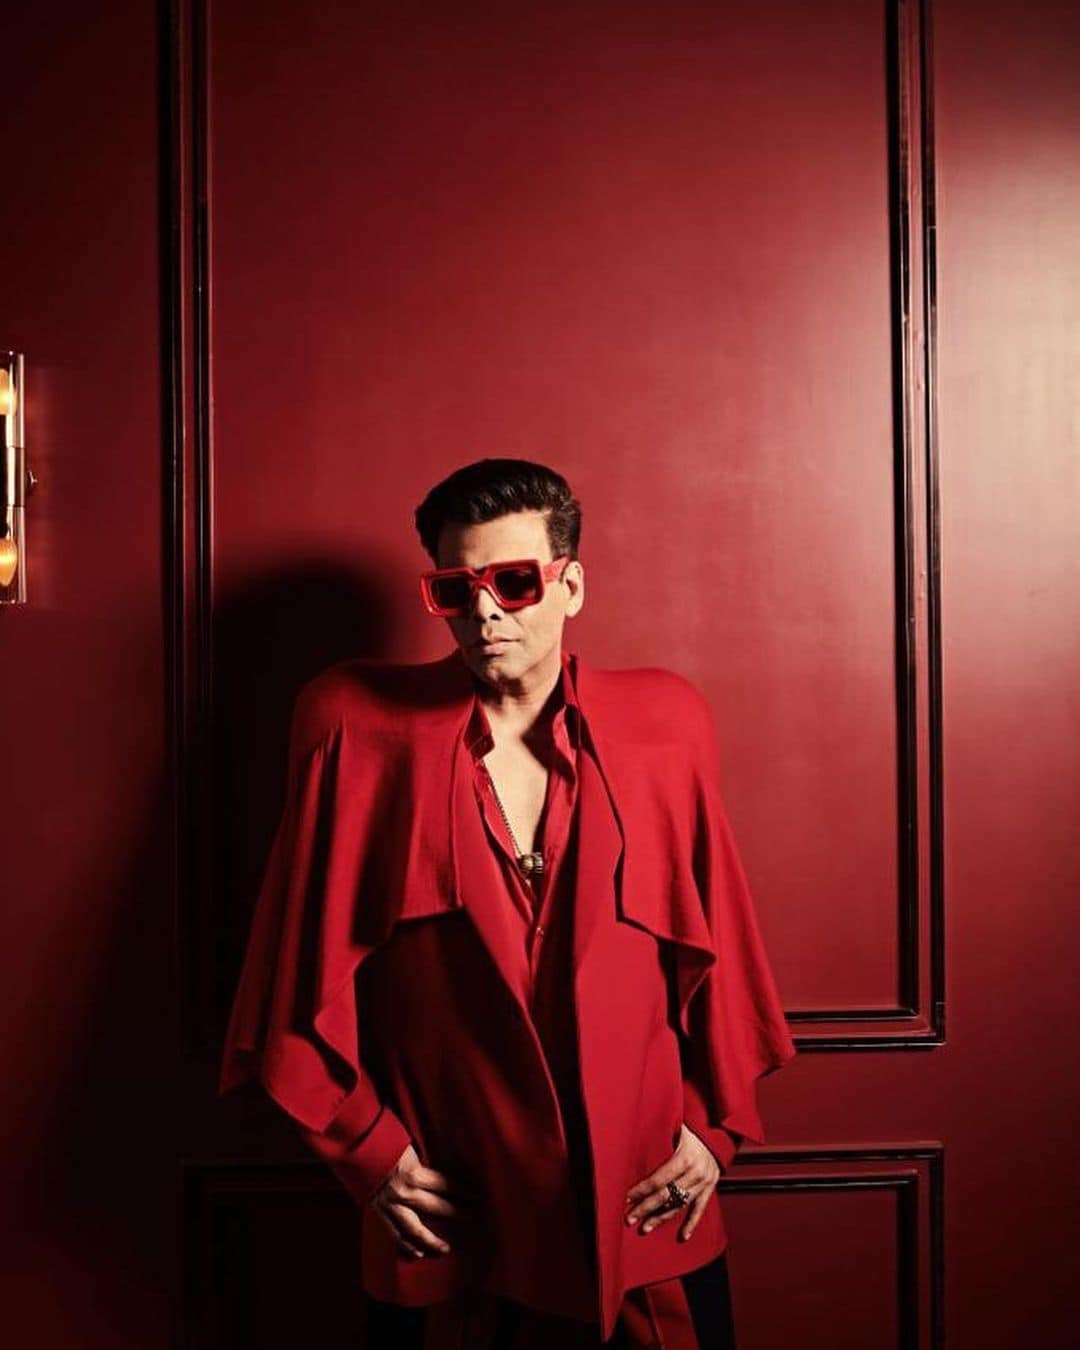 Karan Johar likes to experiment with his looks. This custom Kaushik Velendra handmade power shoulder suit in red is what Karan Johar's style is all about.